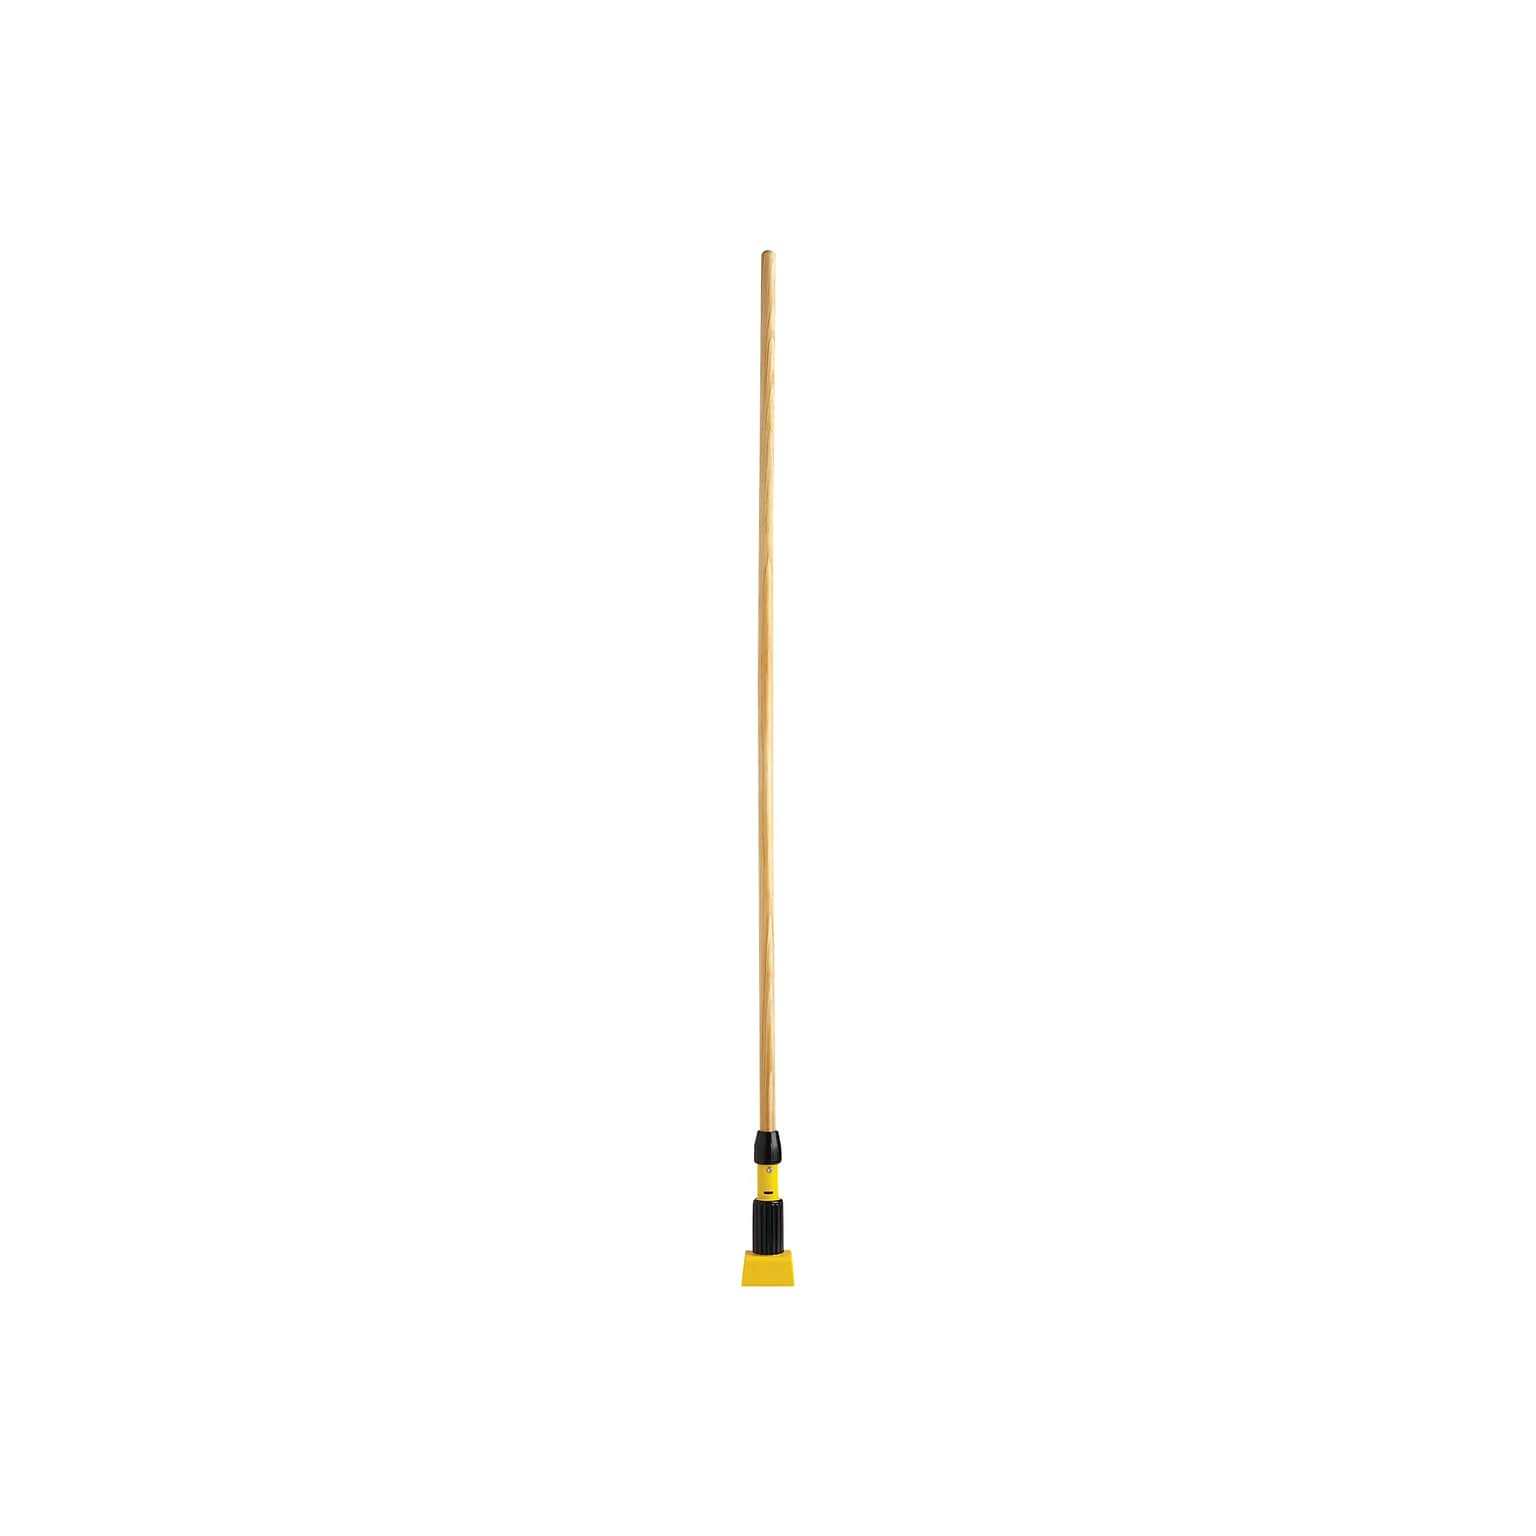 Rubbermaid Gripper 60 Wood Wet Mop Handle, Yellow/Natural (FGH216000000)